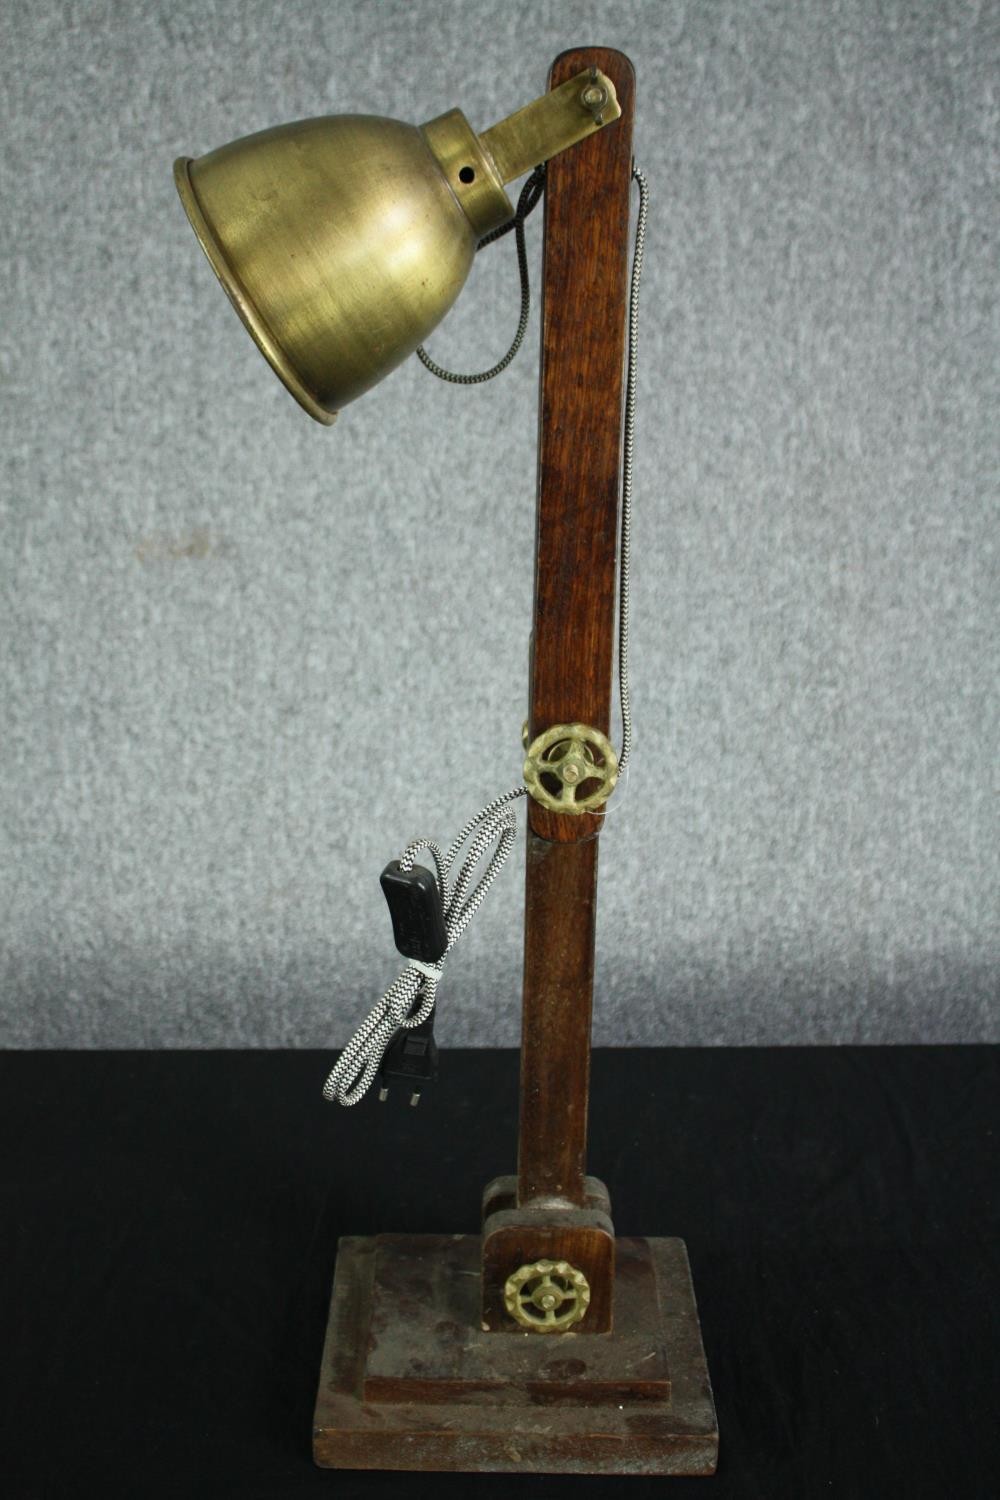 A wooden anglepoise type lamp with a metal shade and fixings. H.77cm. - Image 5 of 5